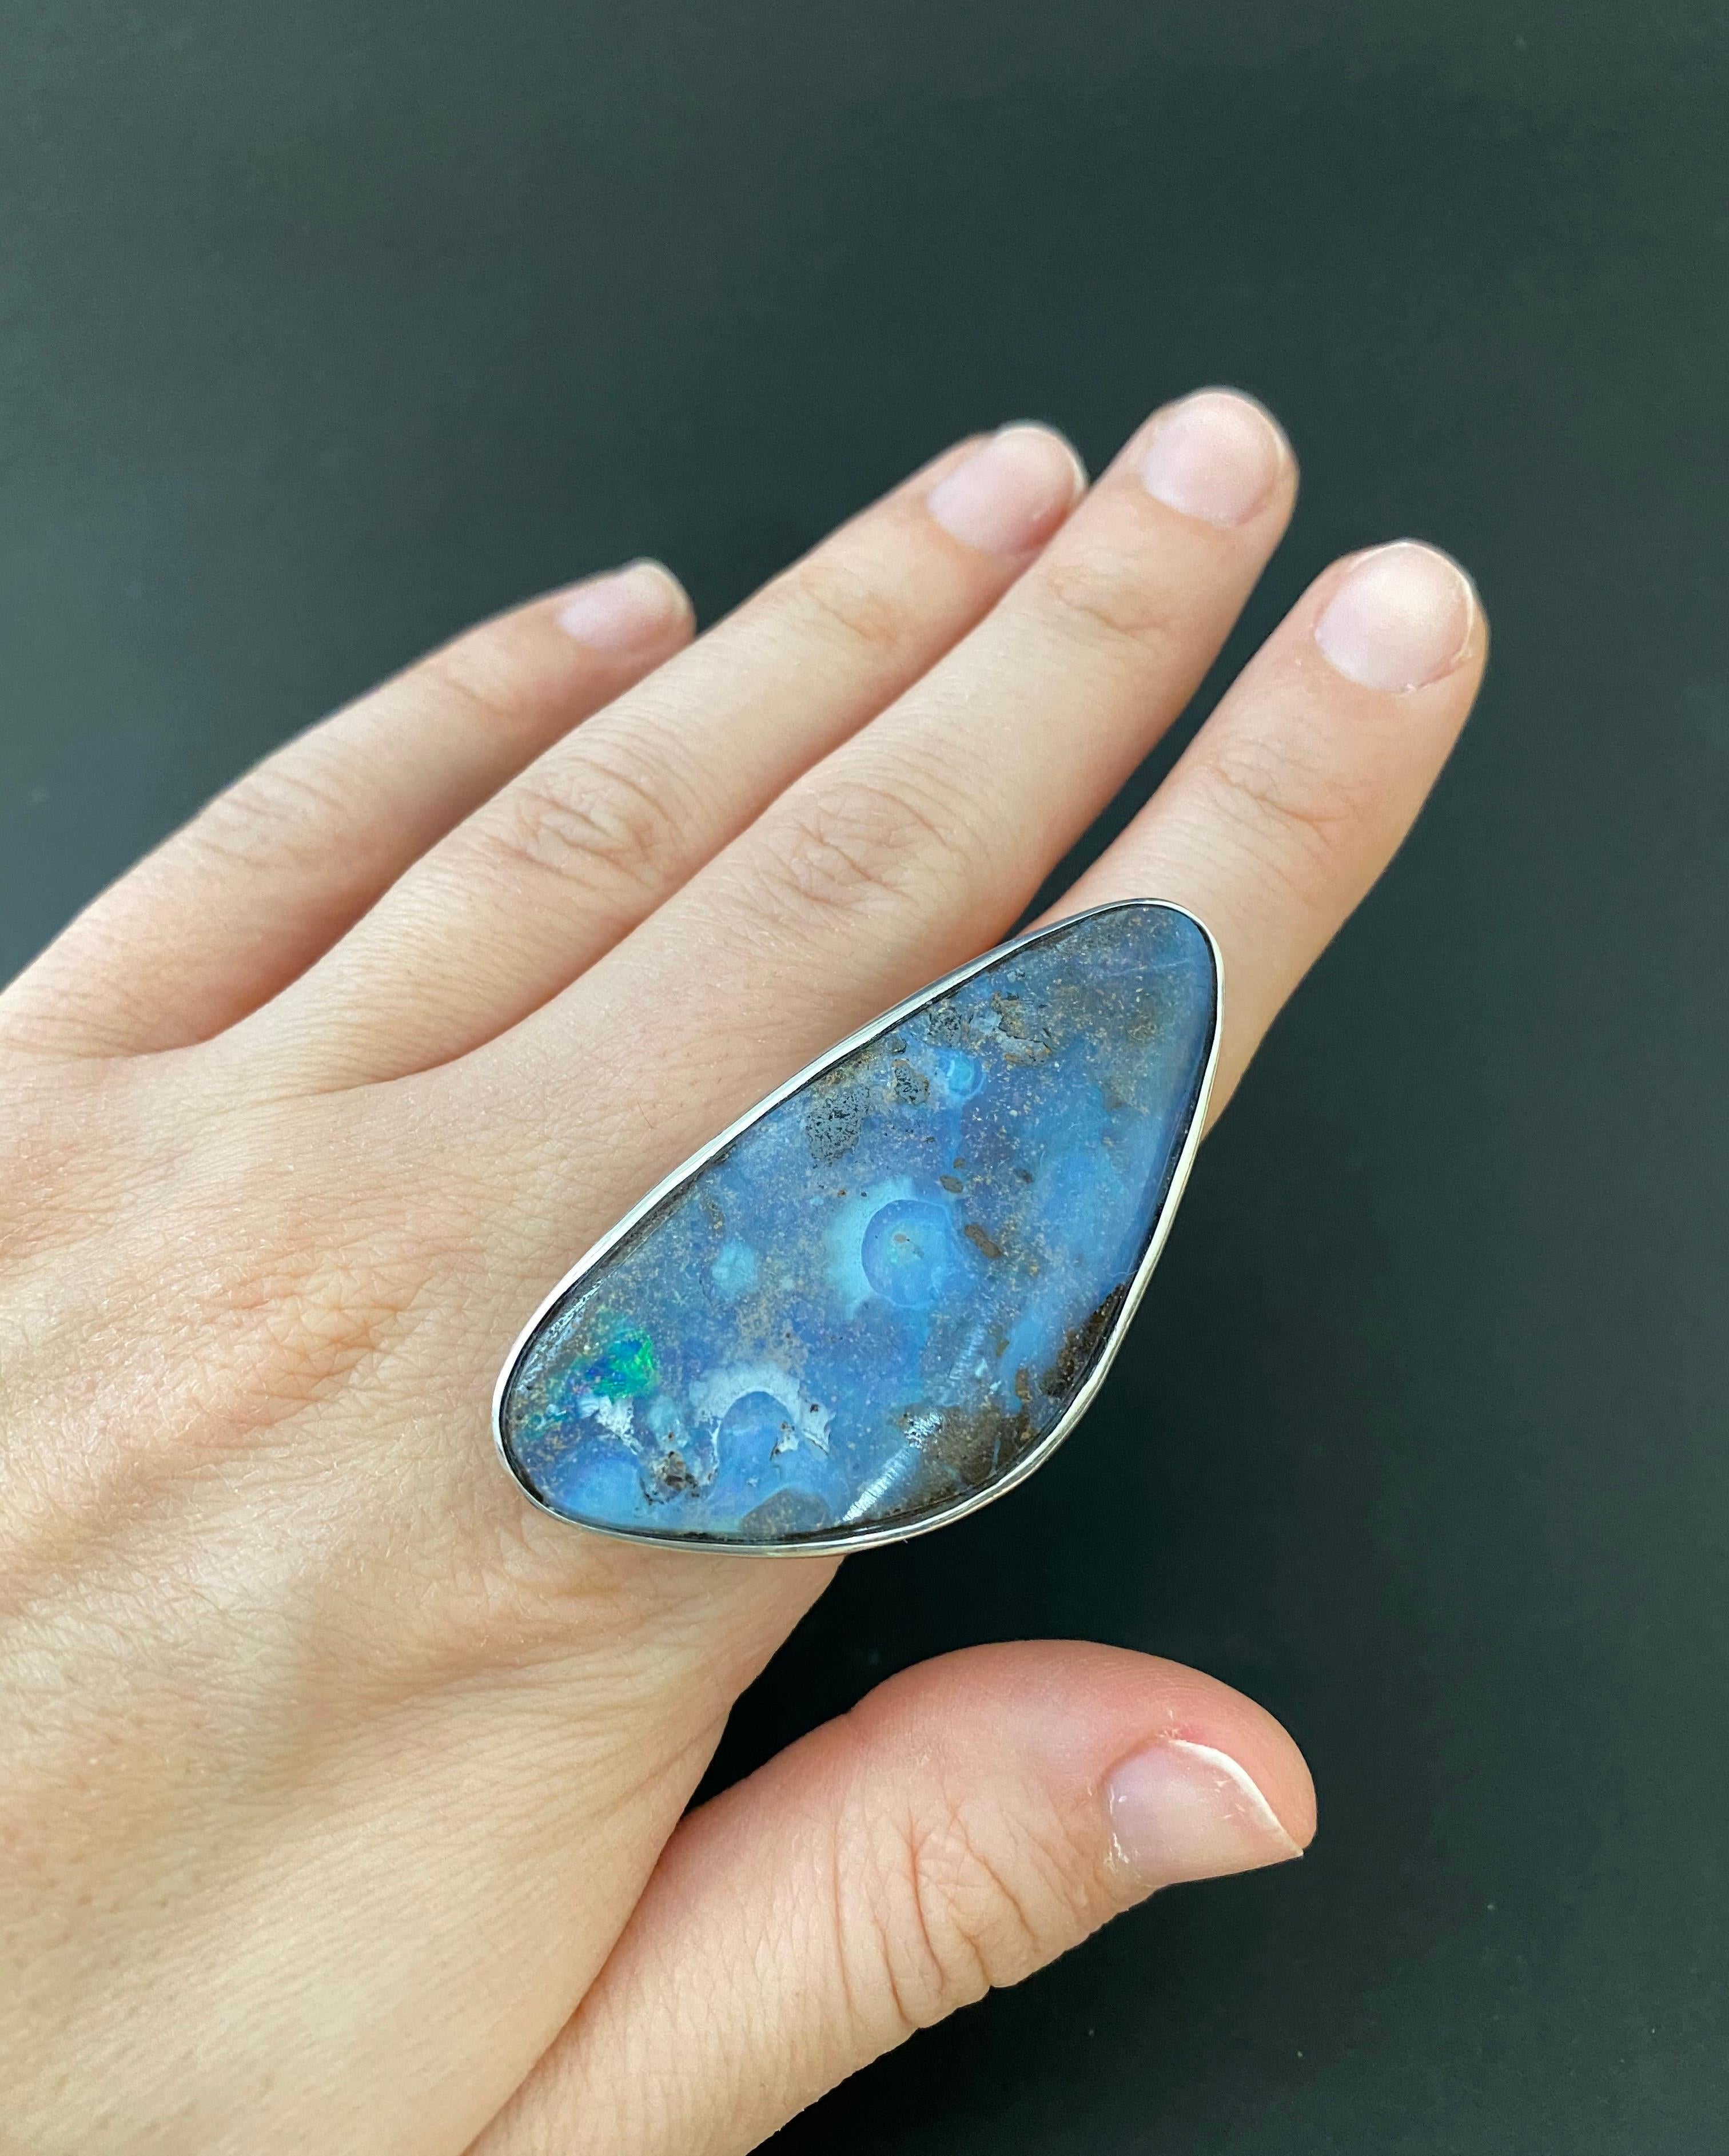 Material: Silver
Gemstone: 1 Opal at 61.03 Carats.
Ring Size: 8 Alberto offers complimentary sizing on all rings.
This piece measures approximately 50 x 26 millimeters.

Fine one-of-a-kind craftsmanship meets incredible quality in this breathtaking